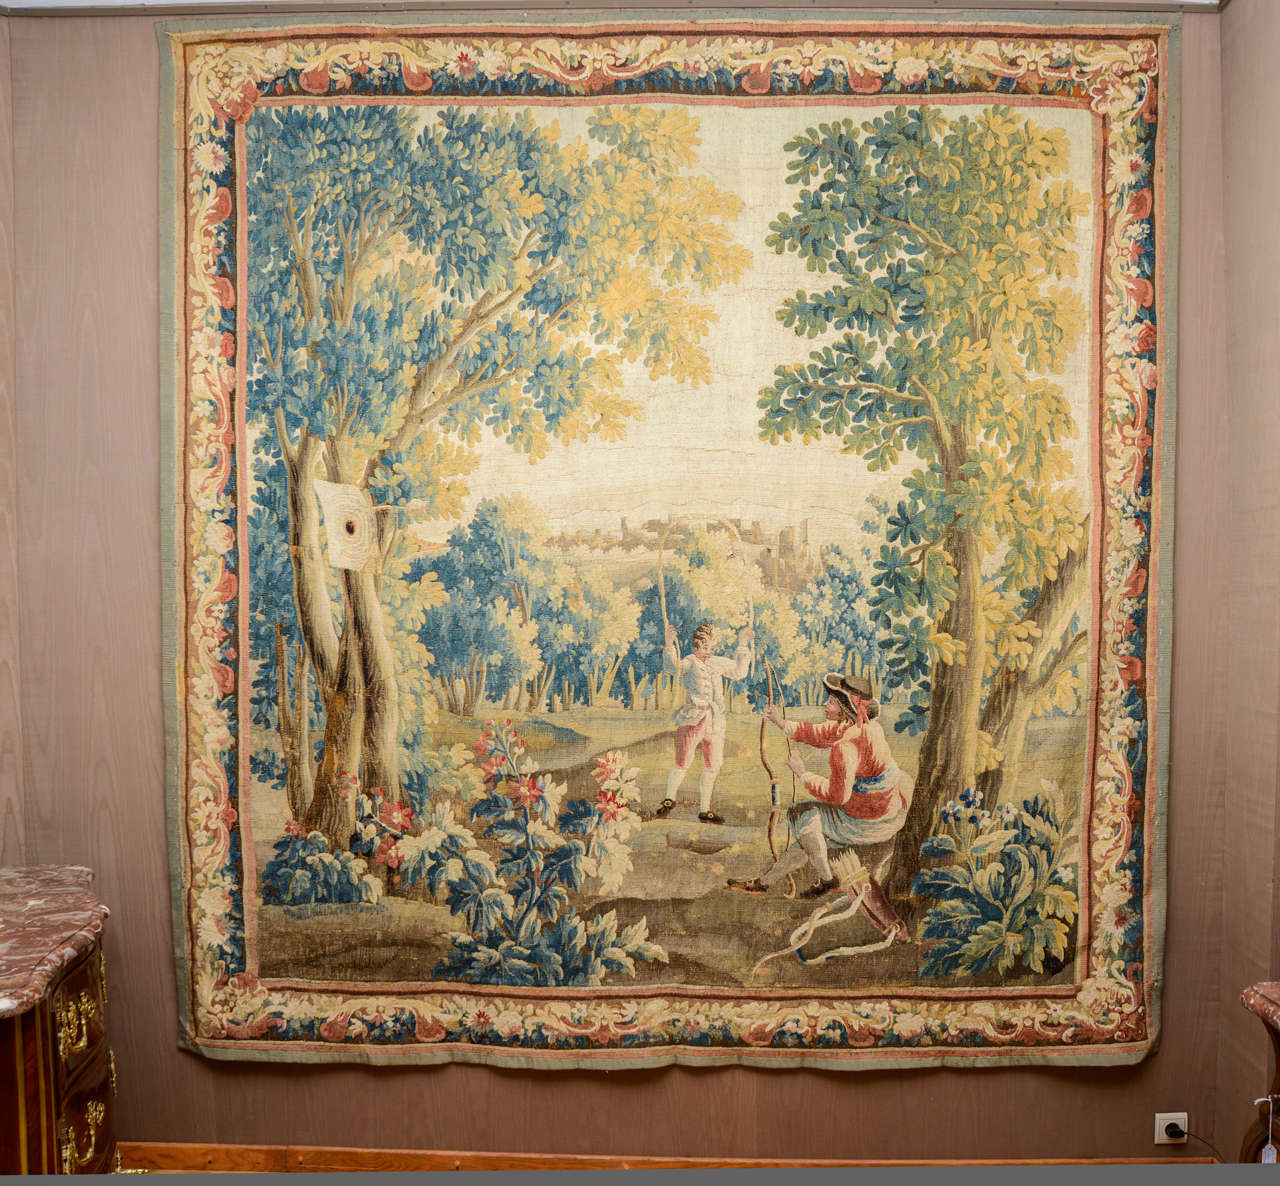 Beautiful Aubusson tapestry Louis XV 18th century with children playing in a landscape.